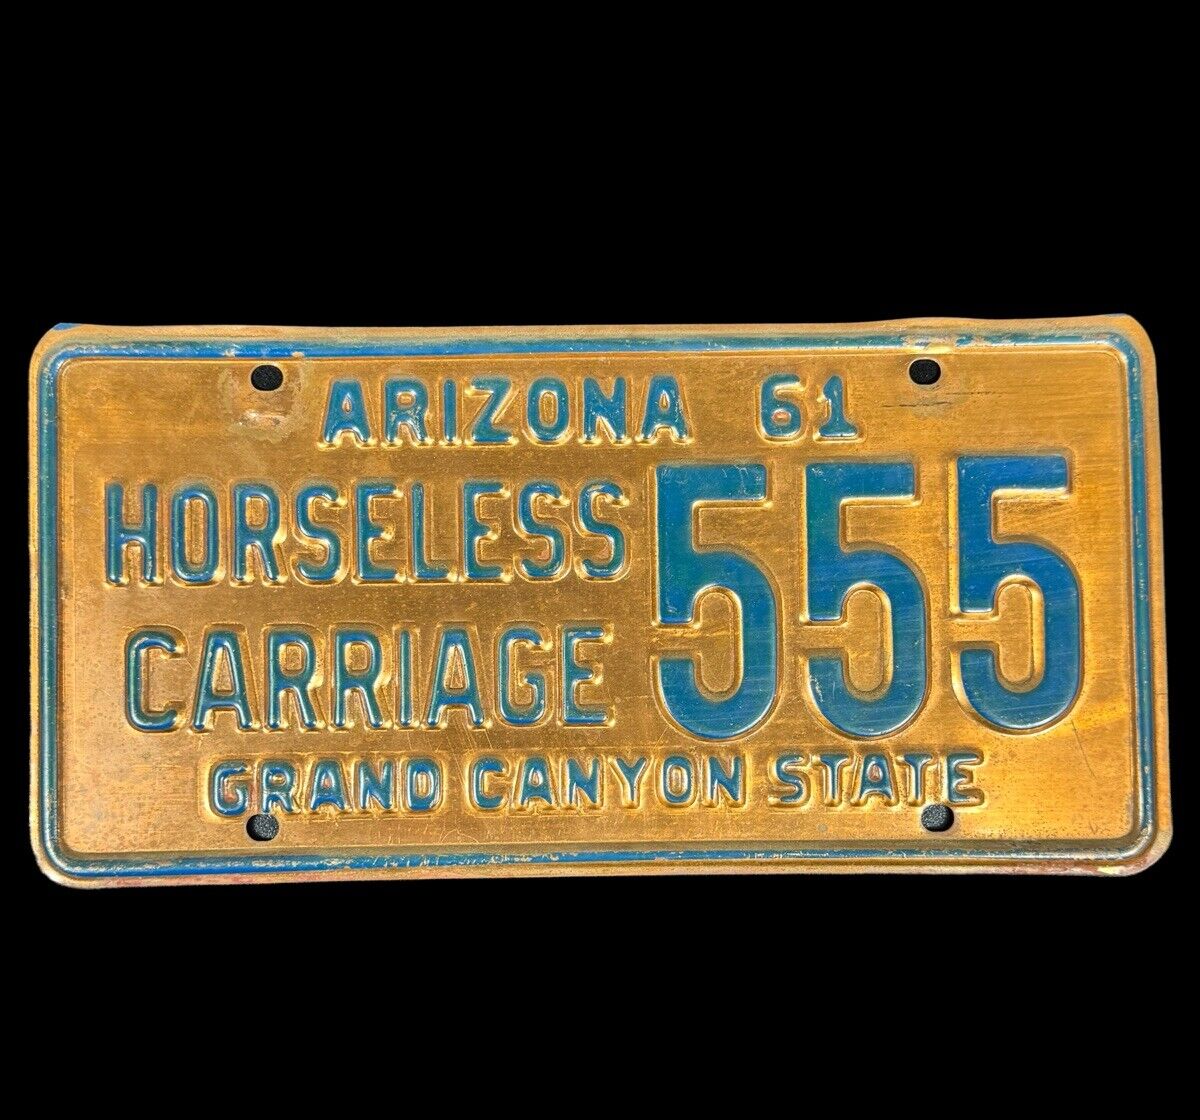 1961 ARIZONA HORSELESS CARRIAGE COPPER LICENSE PLATE #555 (Great Number)